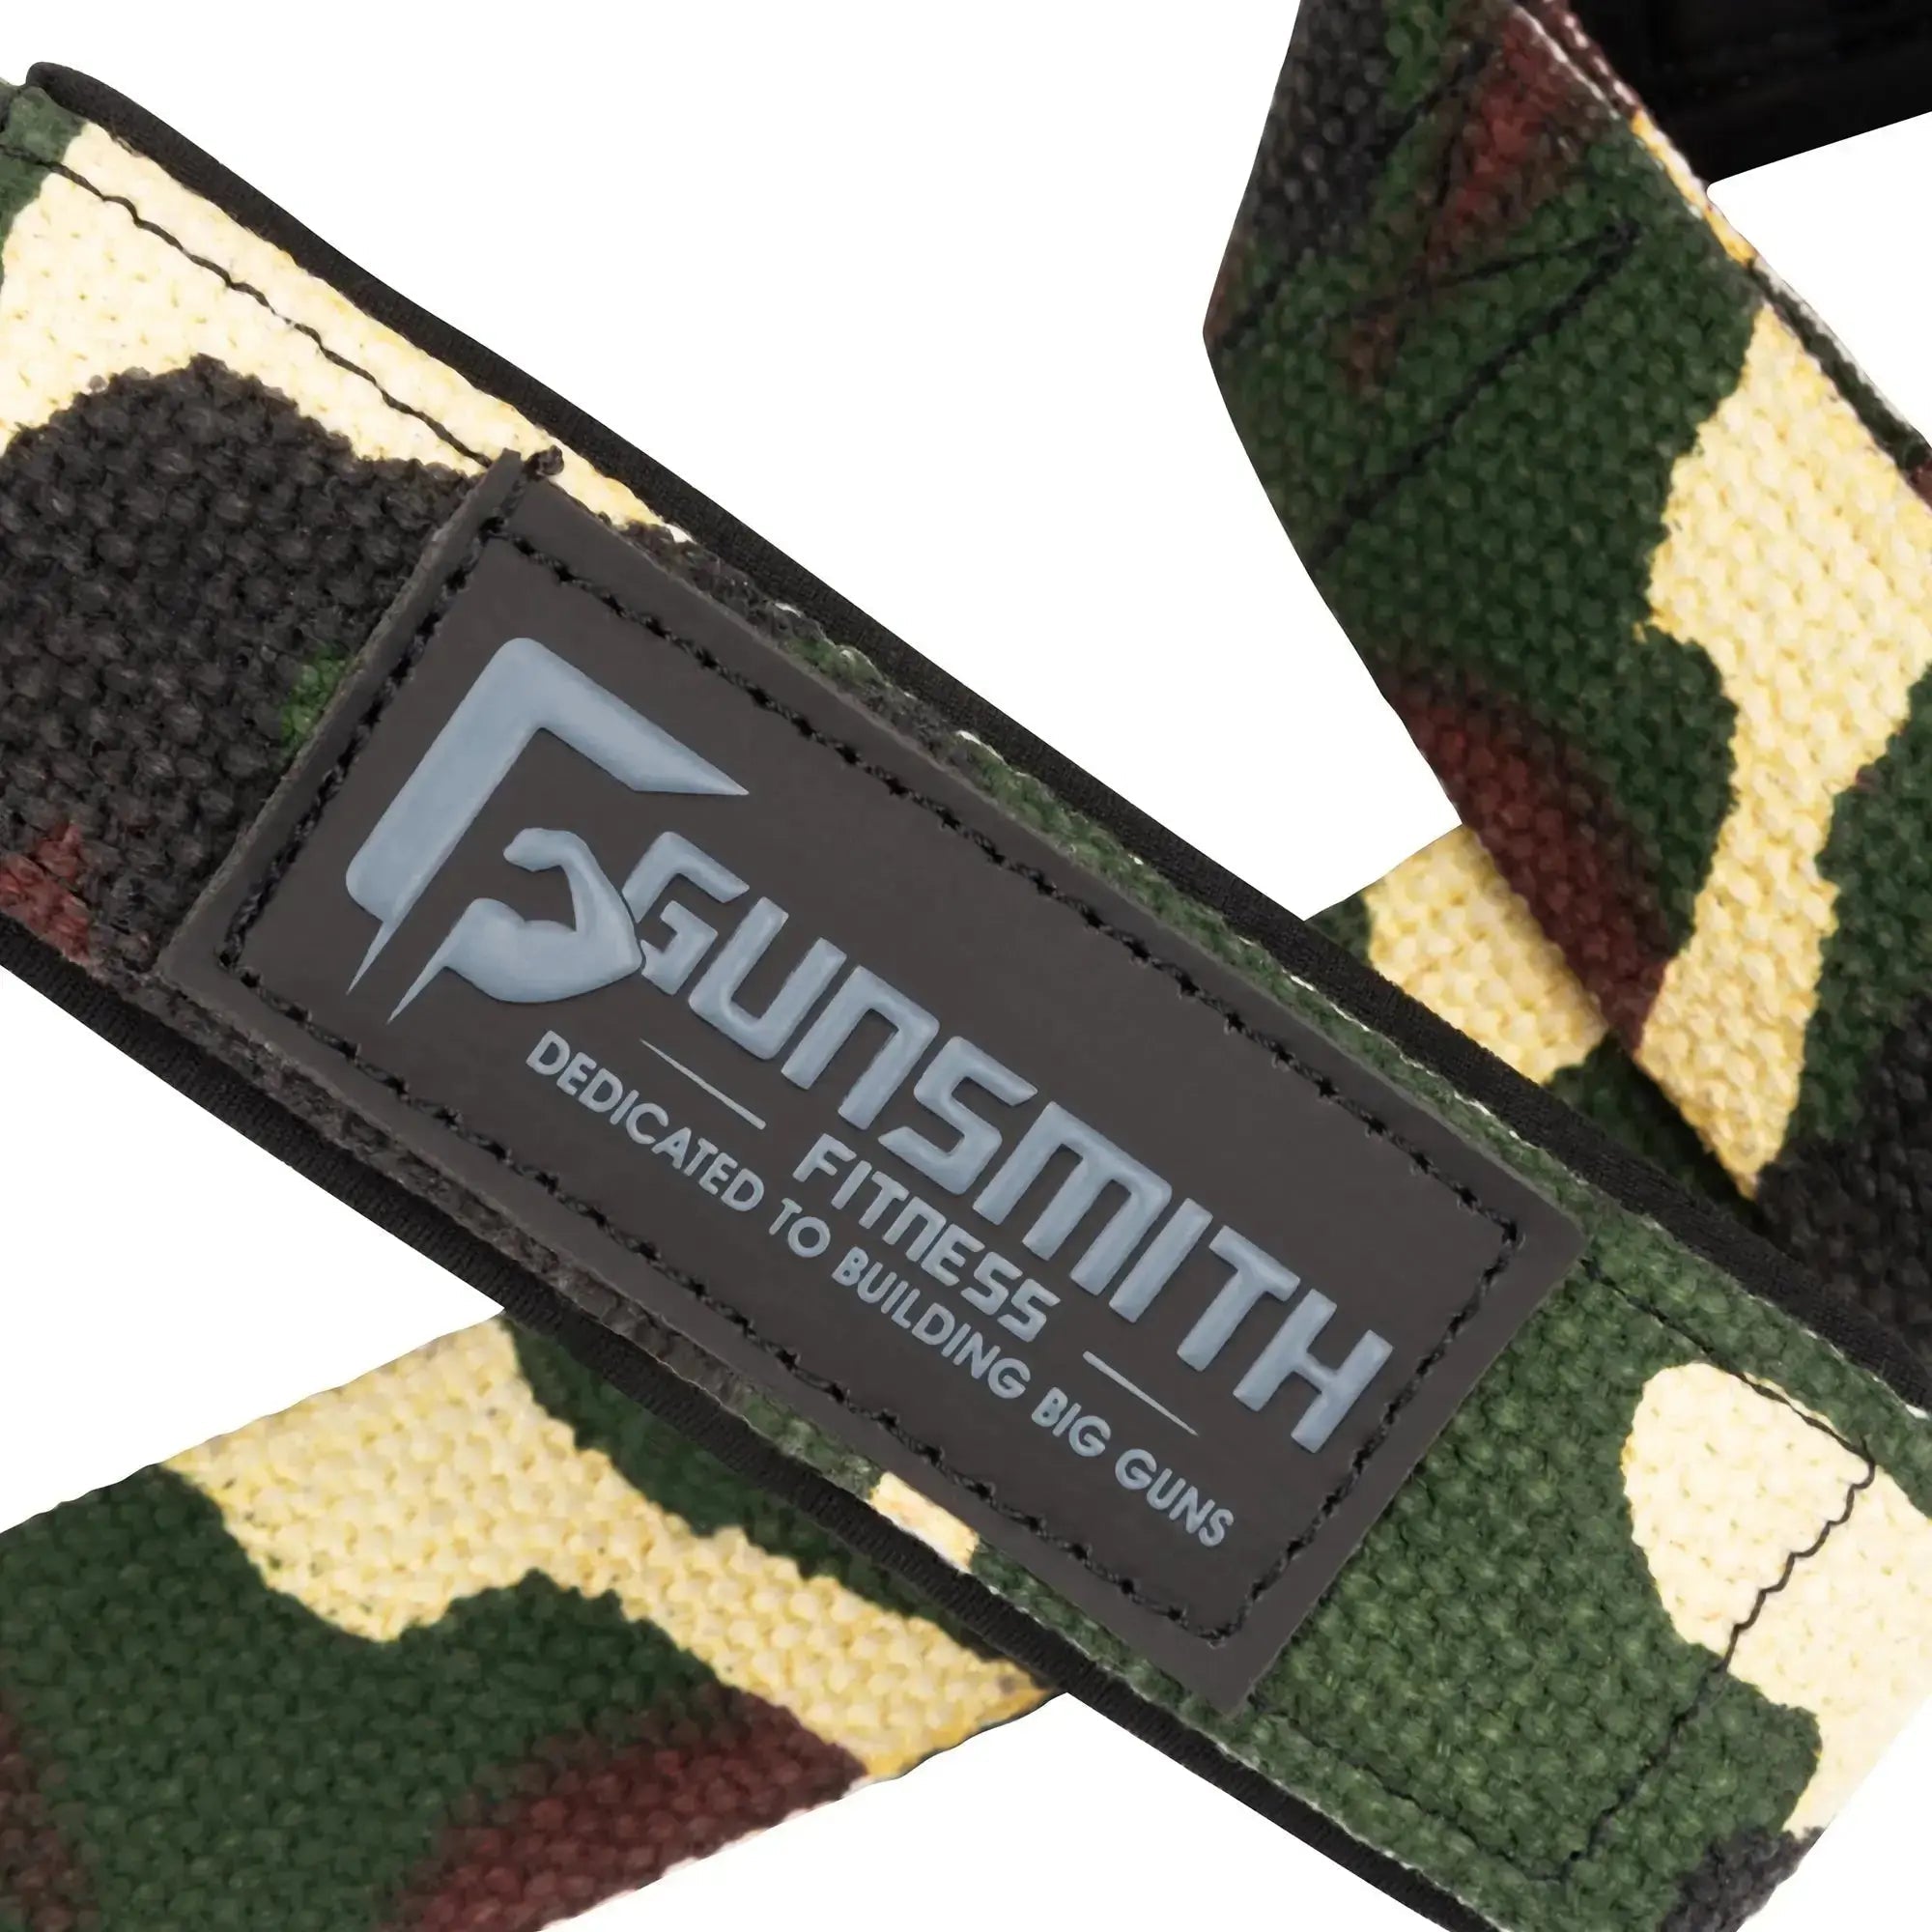 Green Camouflage Camo Strap for Bags 1.5 Wide -  Ireland